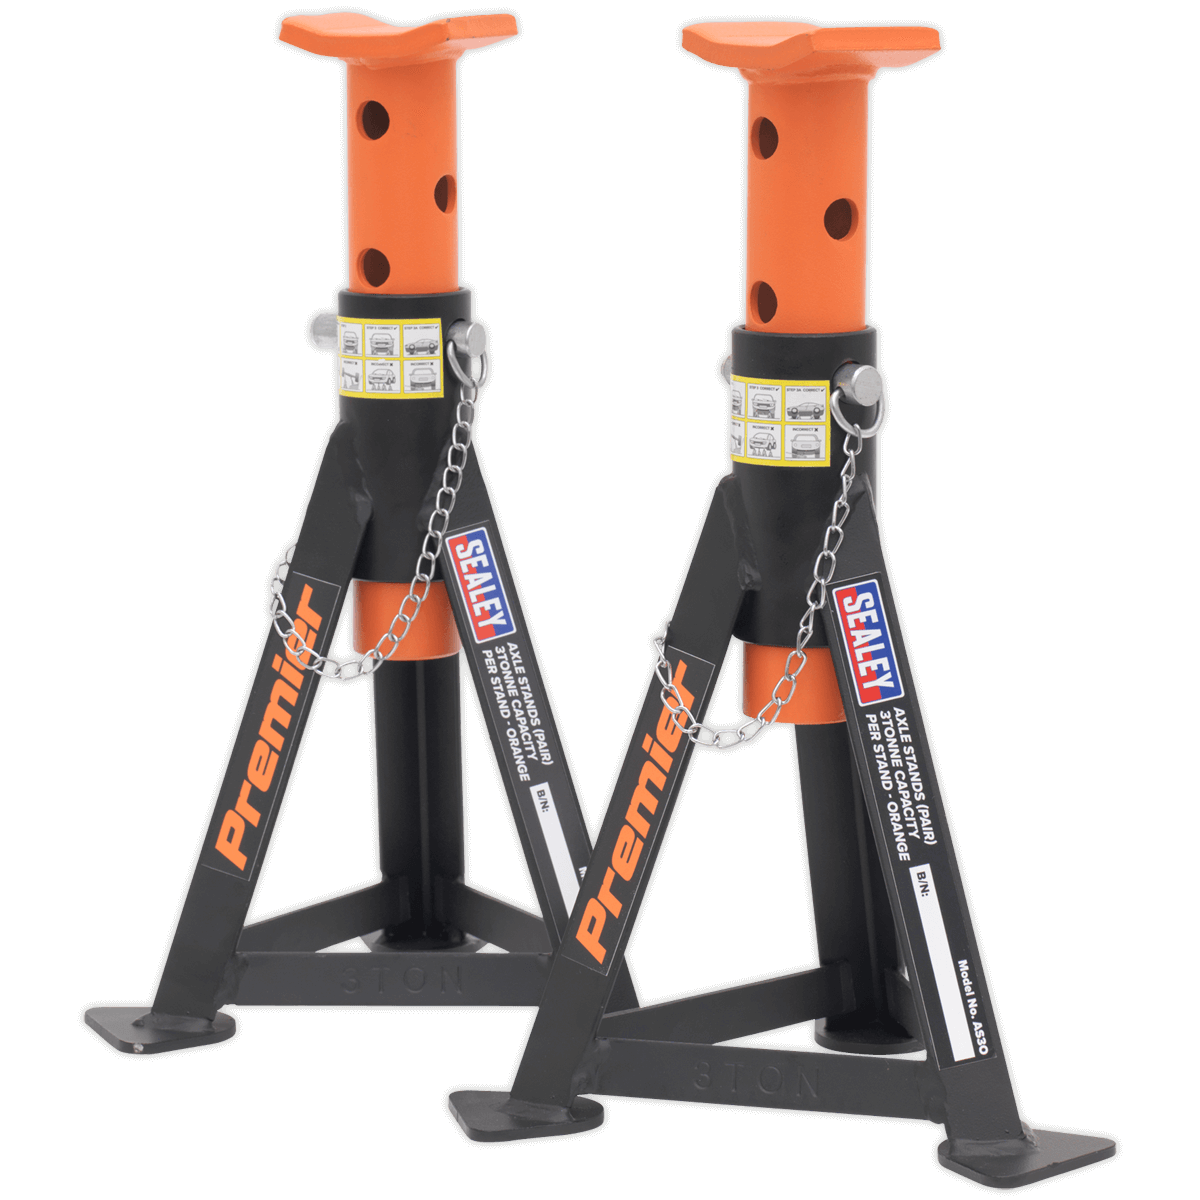 Sealey Axle Stands (Pair) 3 tonne Capacity per Stand - Orange AS3O | Heavy-duty axle stands to safely support vehicles for extended periods of time. | toolforce.ie